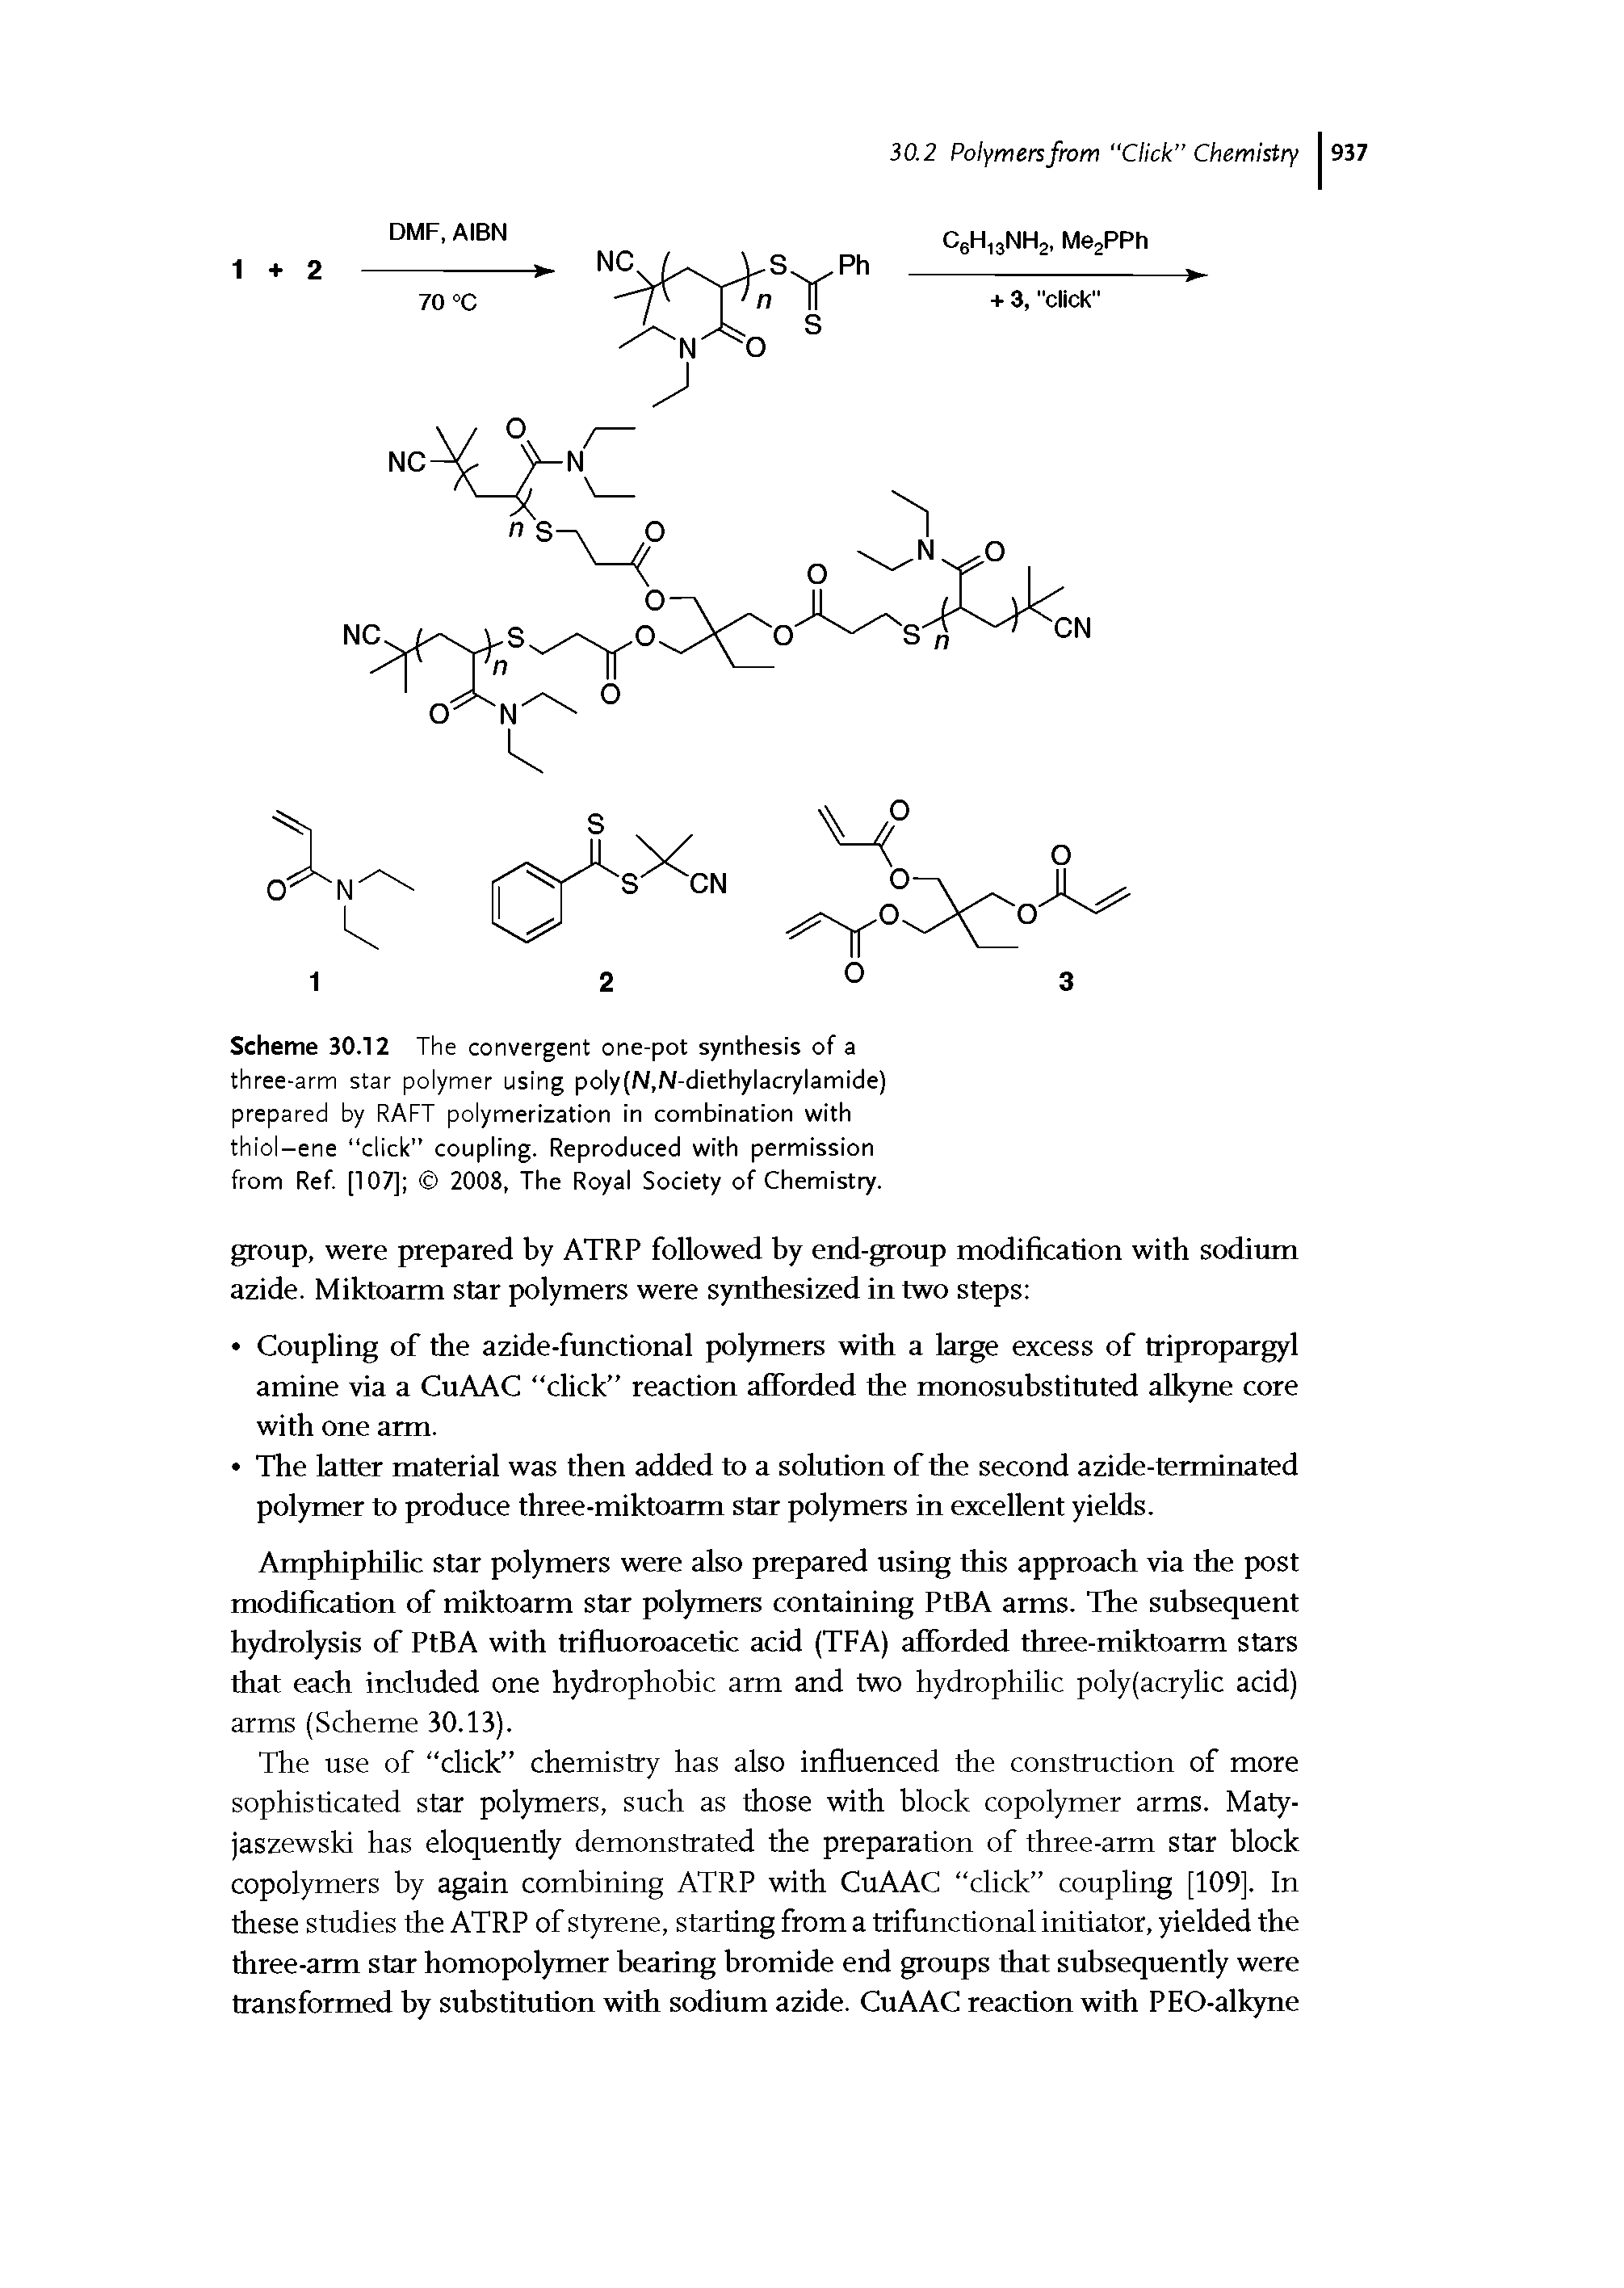 Scheme 30.12 The convergent one-pot synthesis of a three-arm star polymer using poly(N,N-diethylacrylamide) prepared by RAFT polymerization in combination with thiol-ene click" coupling. Reproduced with permission from Ref [107] 2008, The Royal Society of Chemistry.